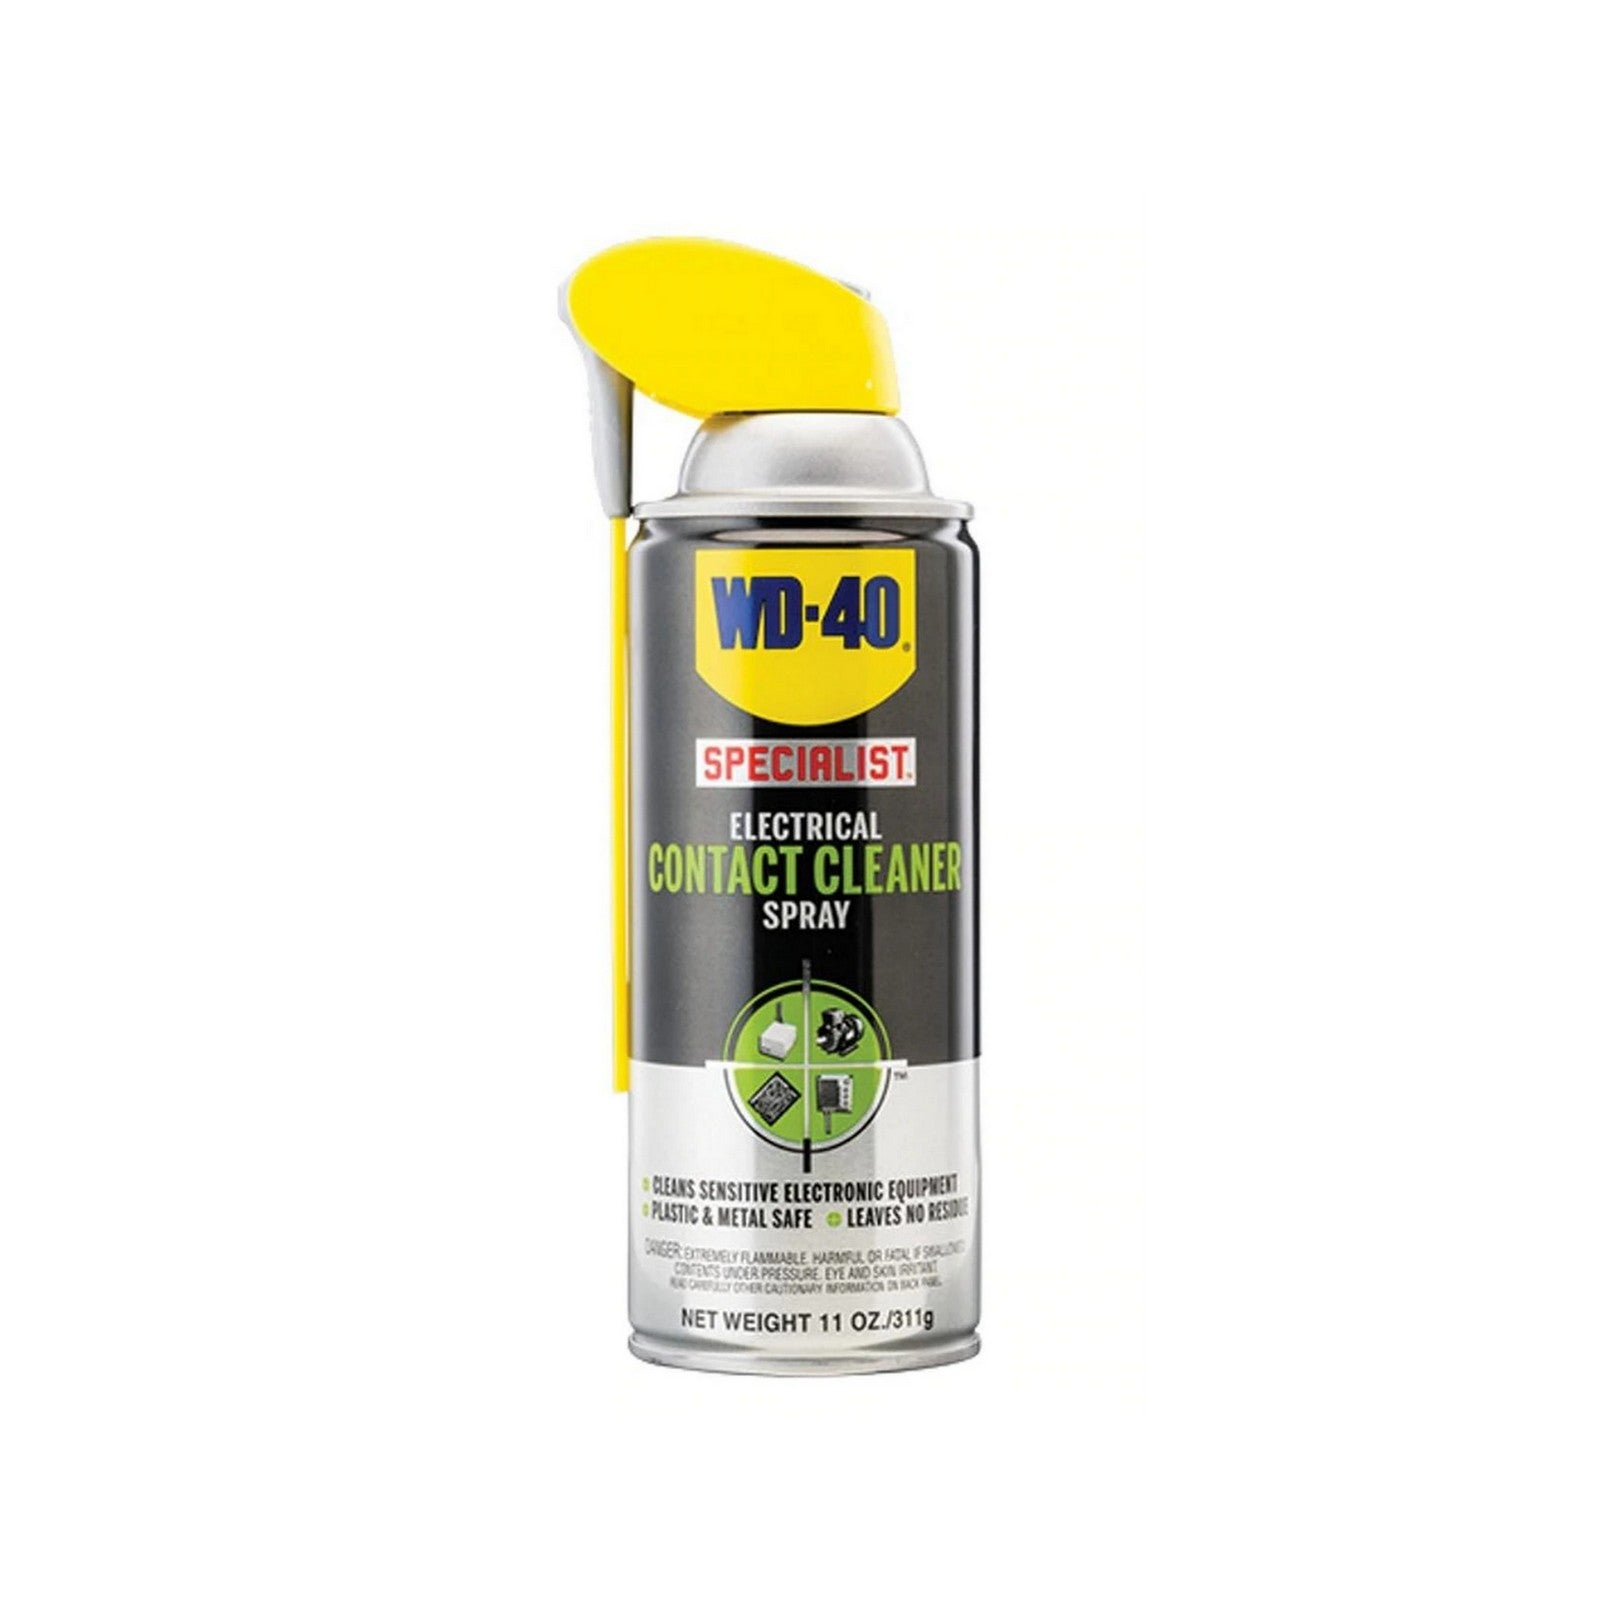 WD-40 CONTACT CLEANER FOR ELECTRICAL CIRCUITS